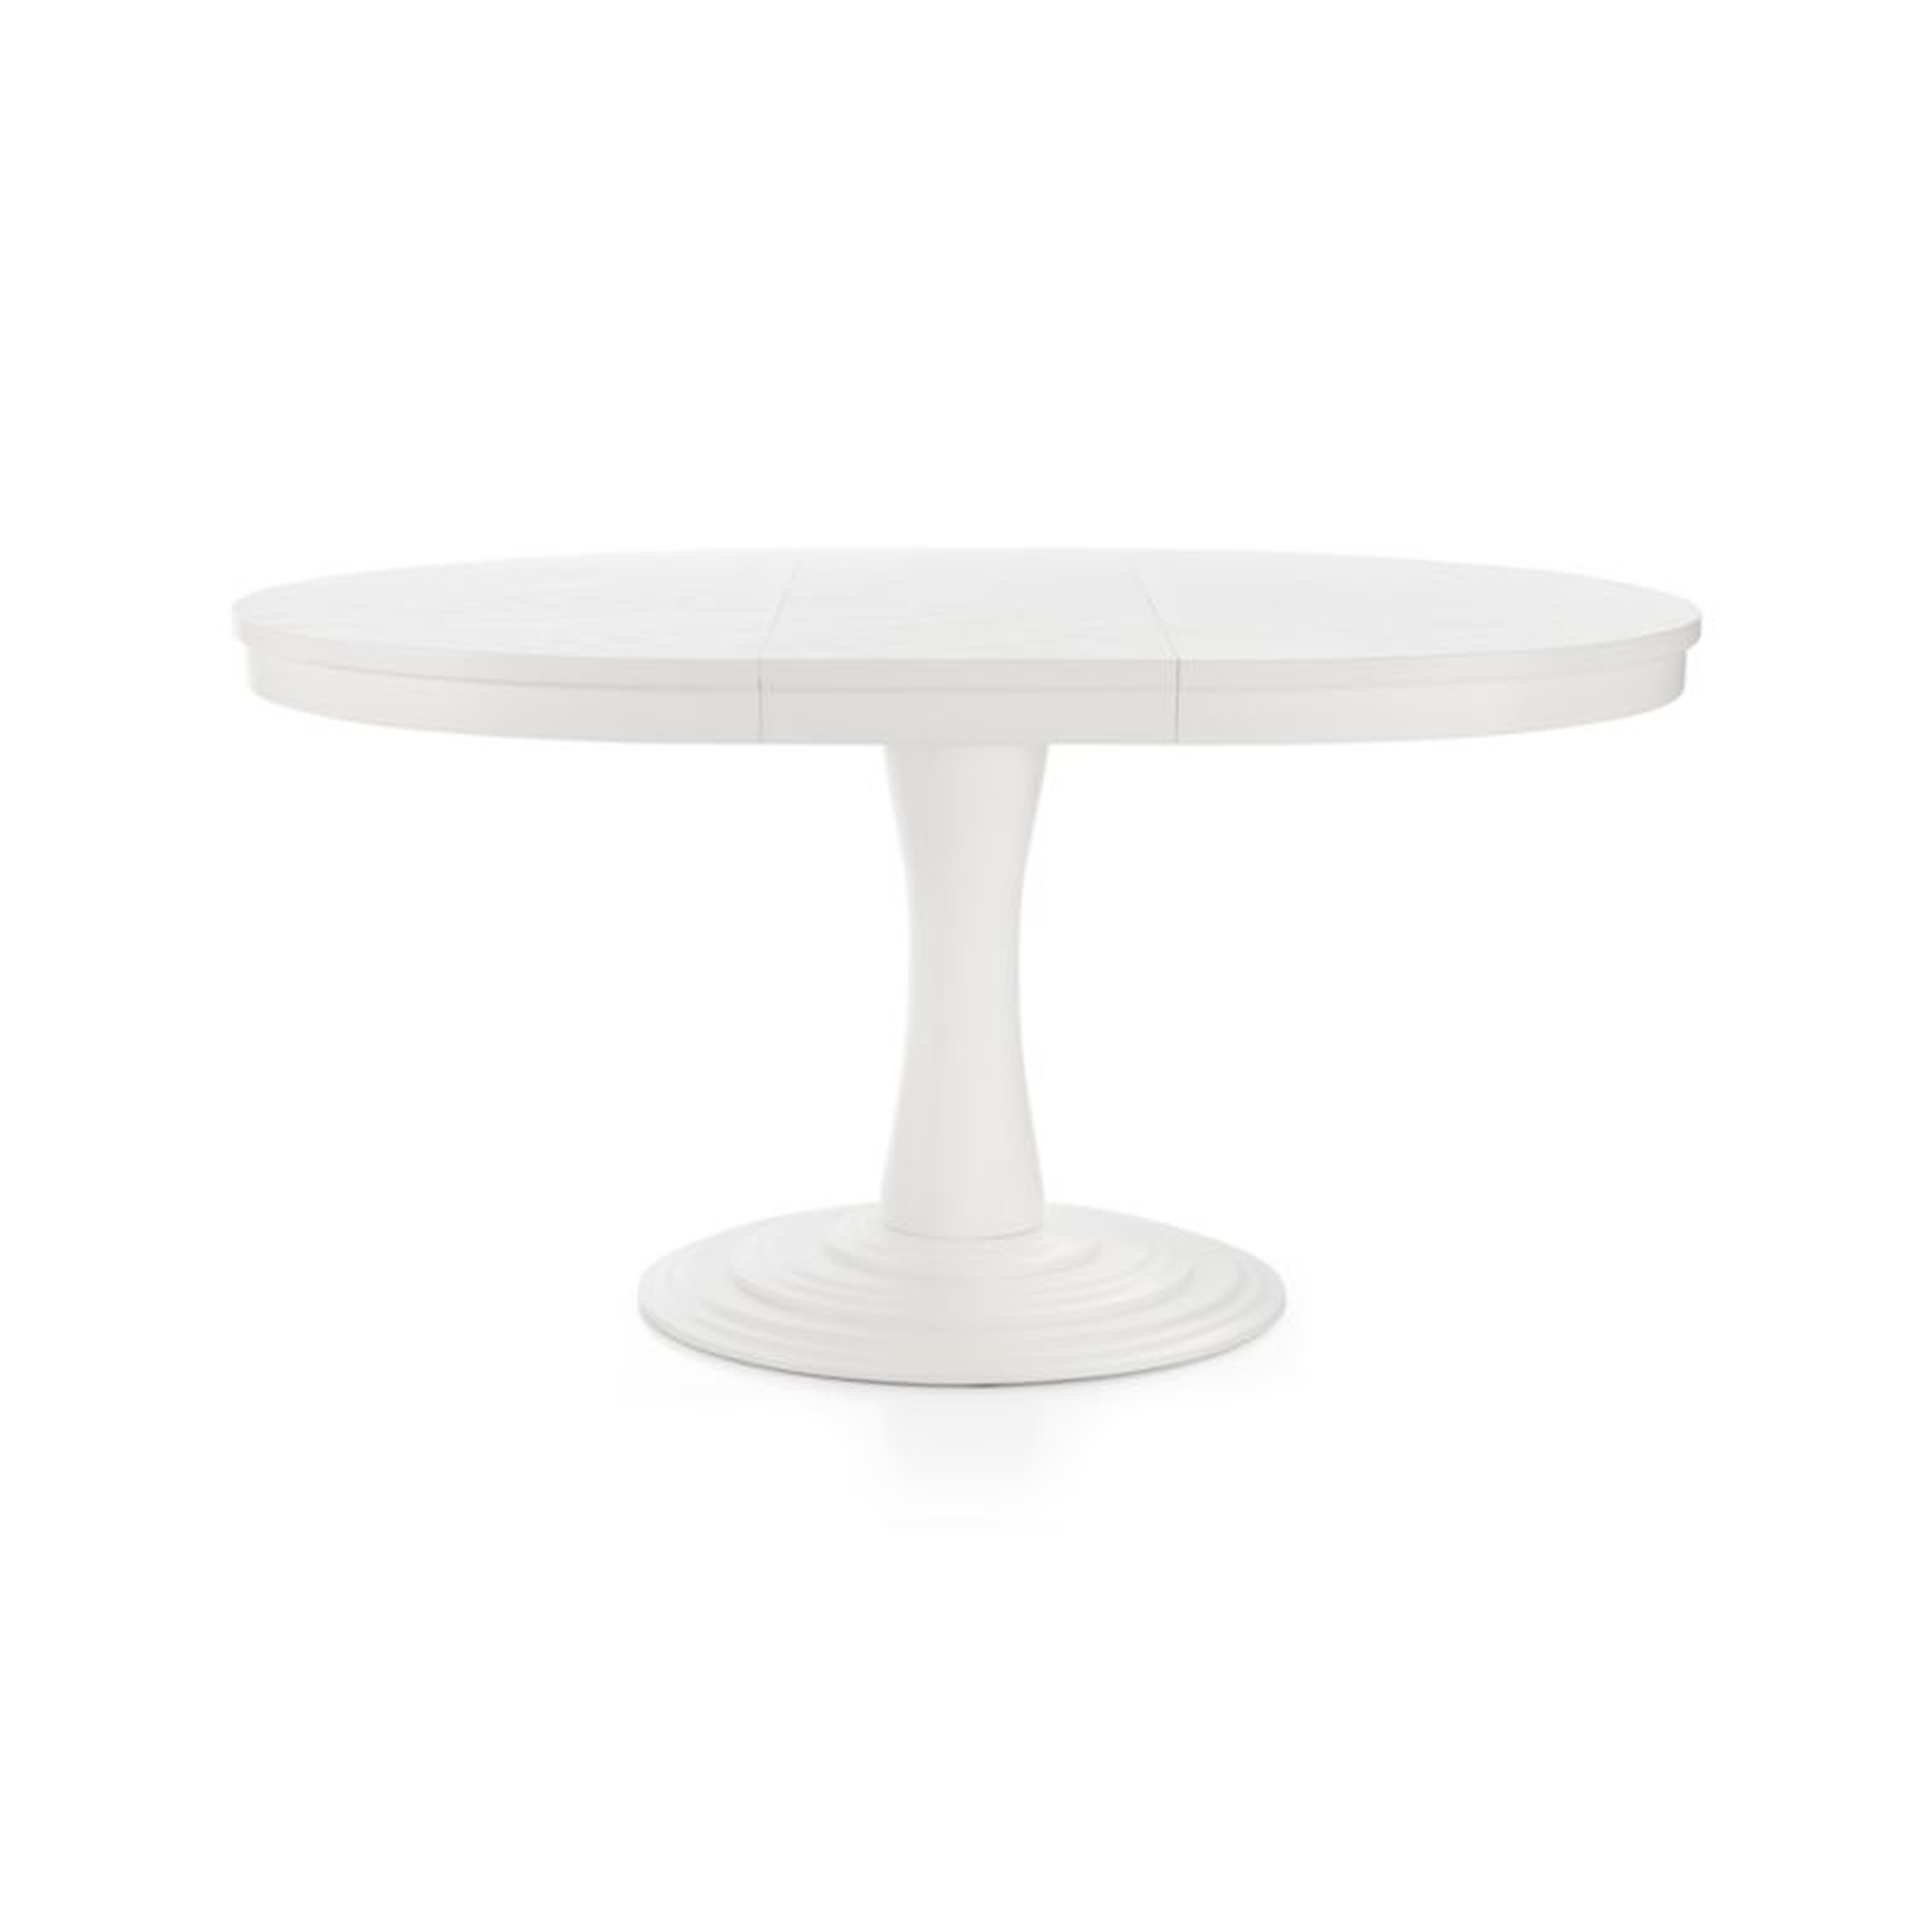 Aniston White 45" Round Extension Dining Table - Crate and Barrel